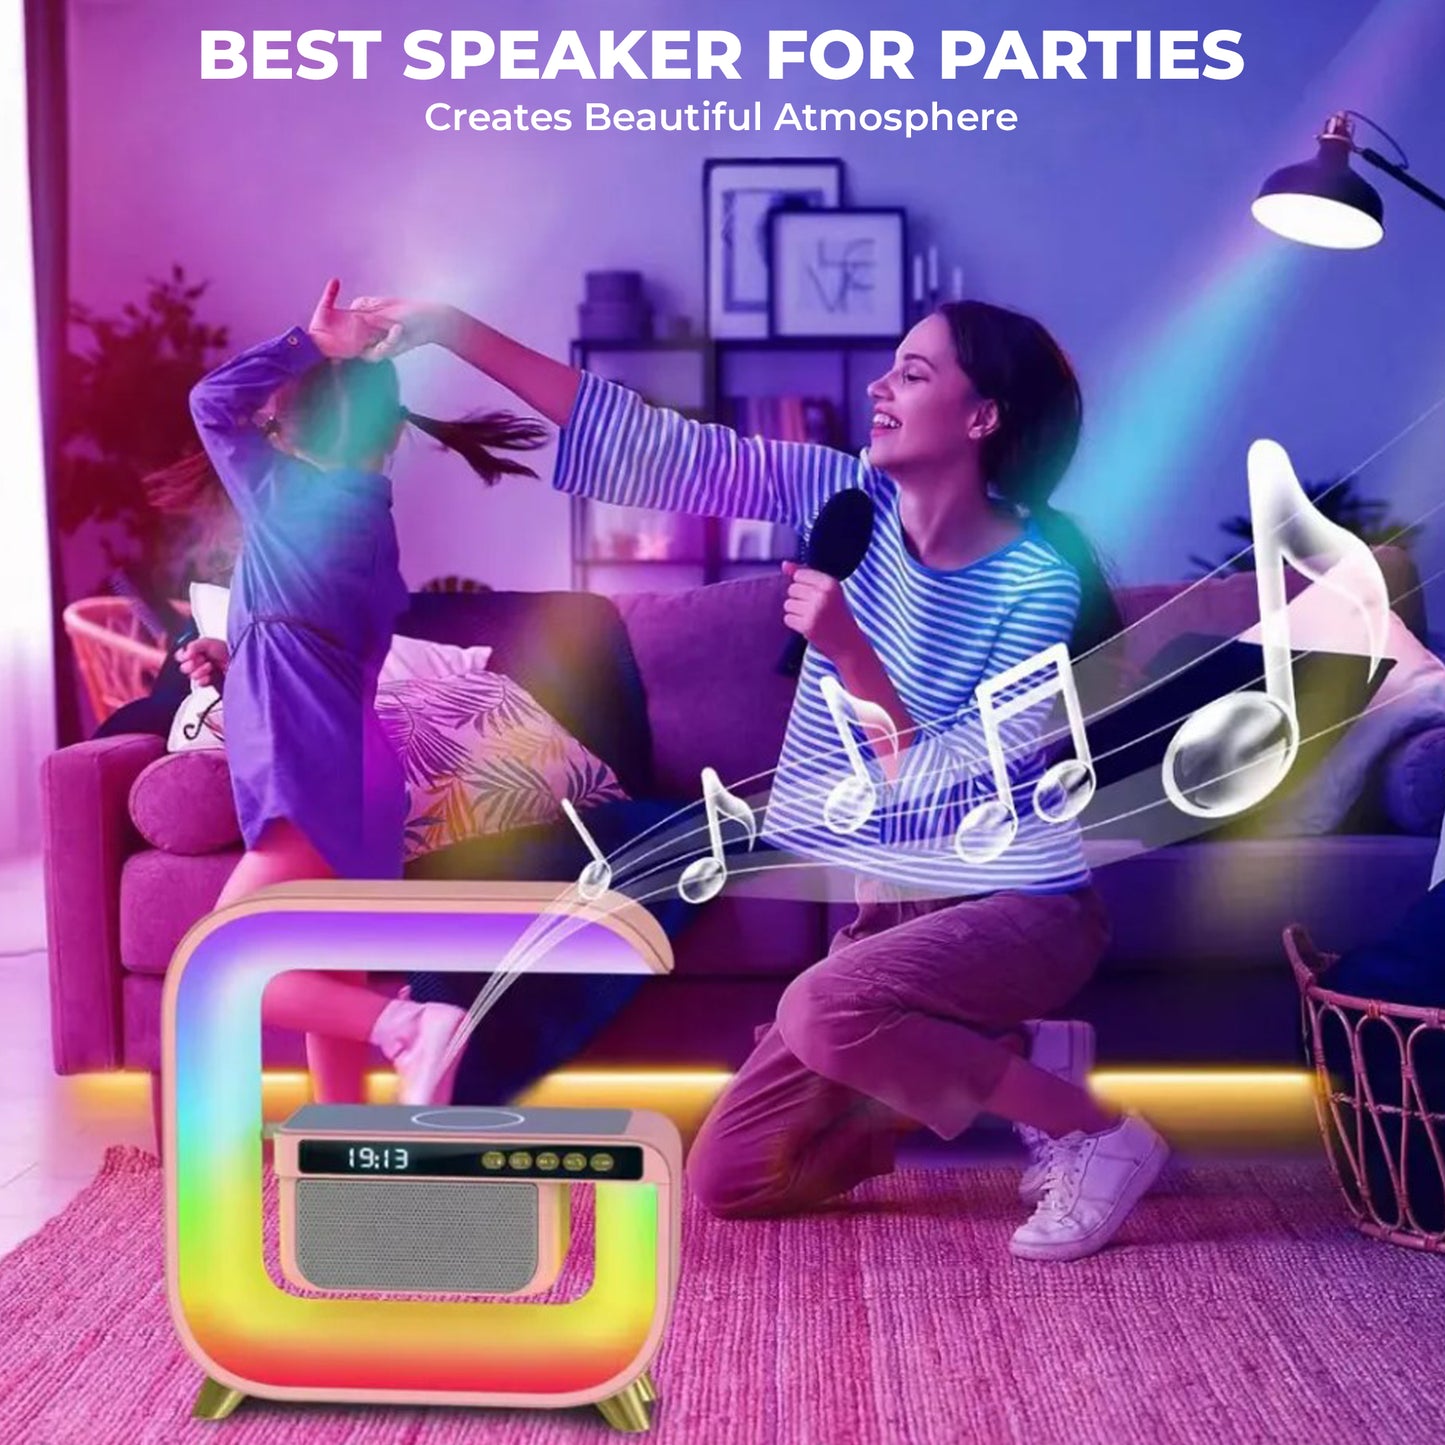 WRADER Multicolor LED G Speaker Night Lamp with Wireless Charger and Clock Google Lamp Night Lamp